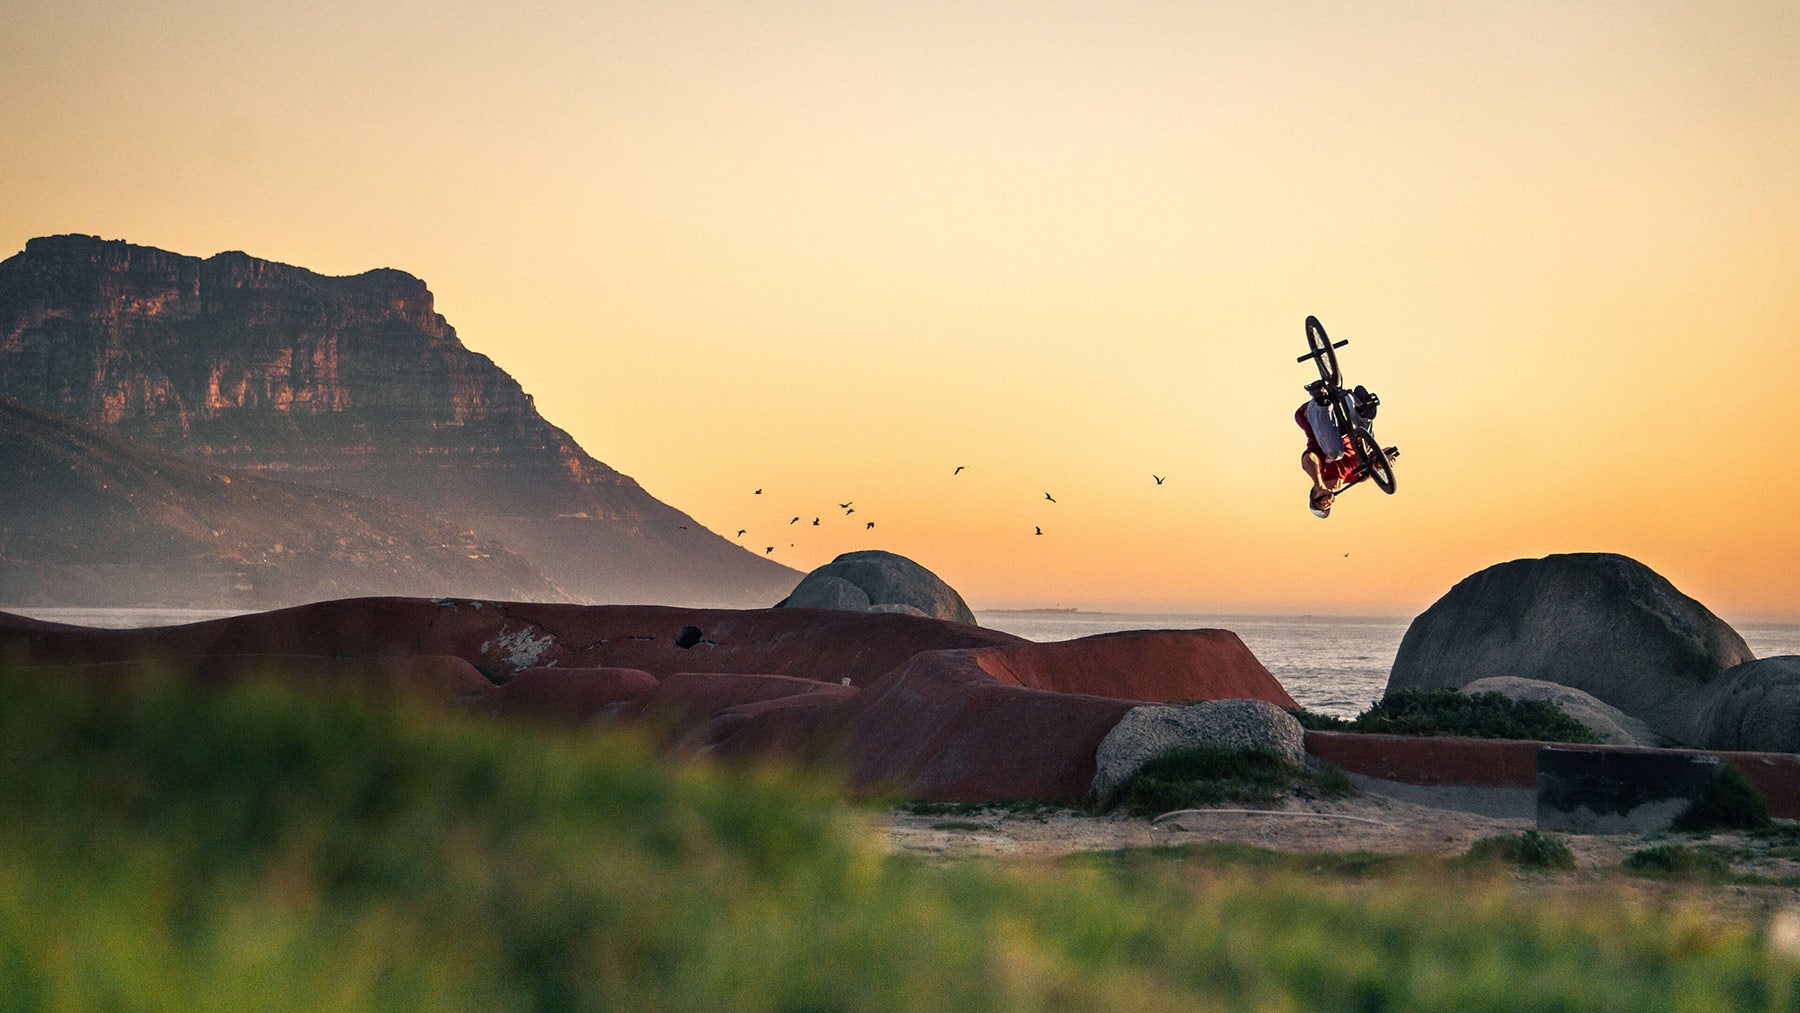 A BMX rider is mid-air with the sea and cliffs behind him with a soft sunset glow in the sky.